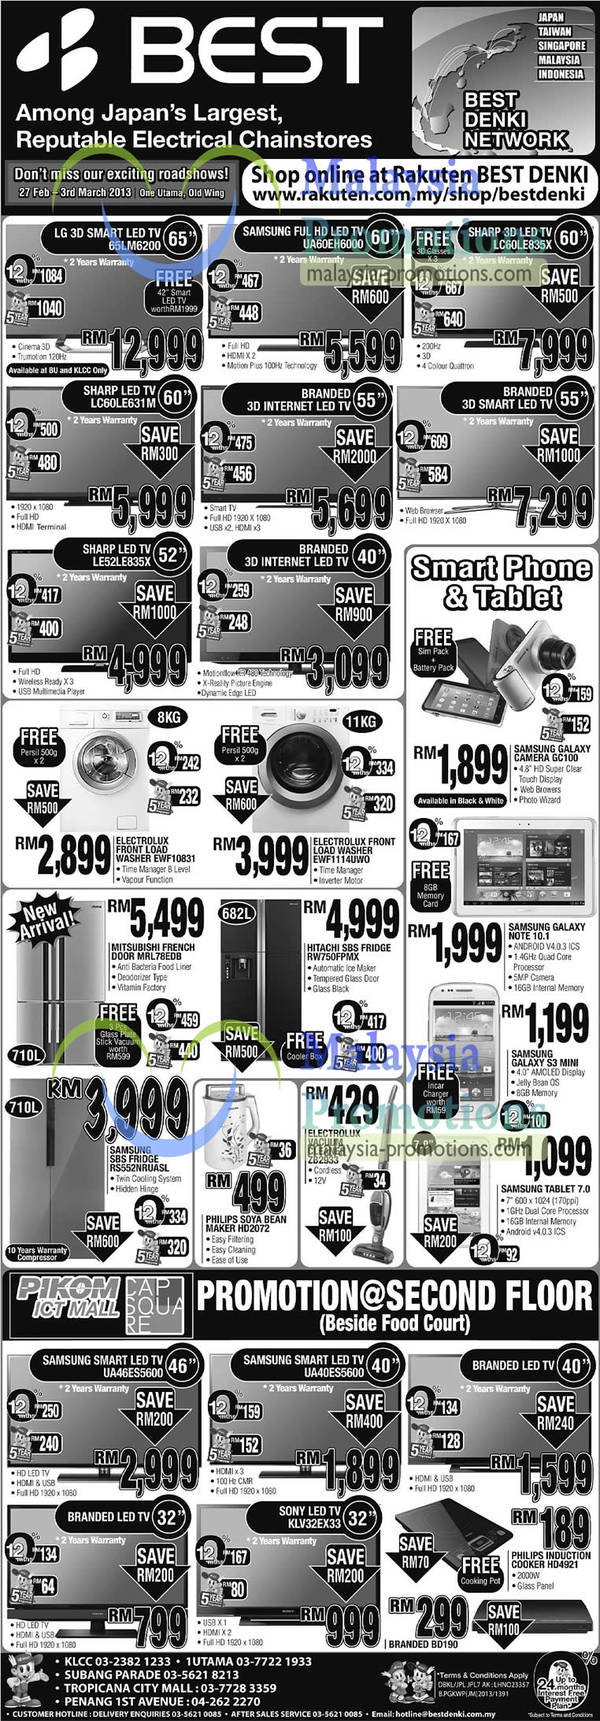 Featured image for Best Denki TV, Appliances & Smartphone Offers 1 Mar 2013